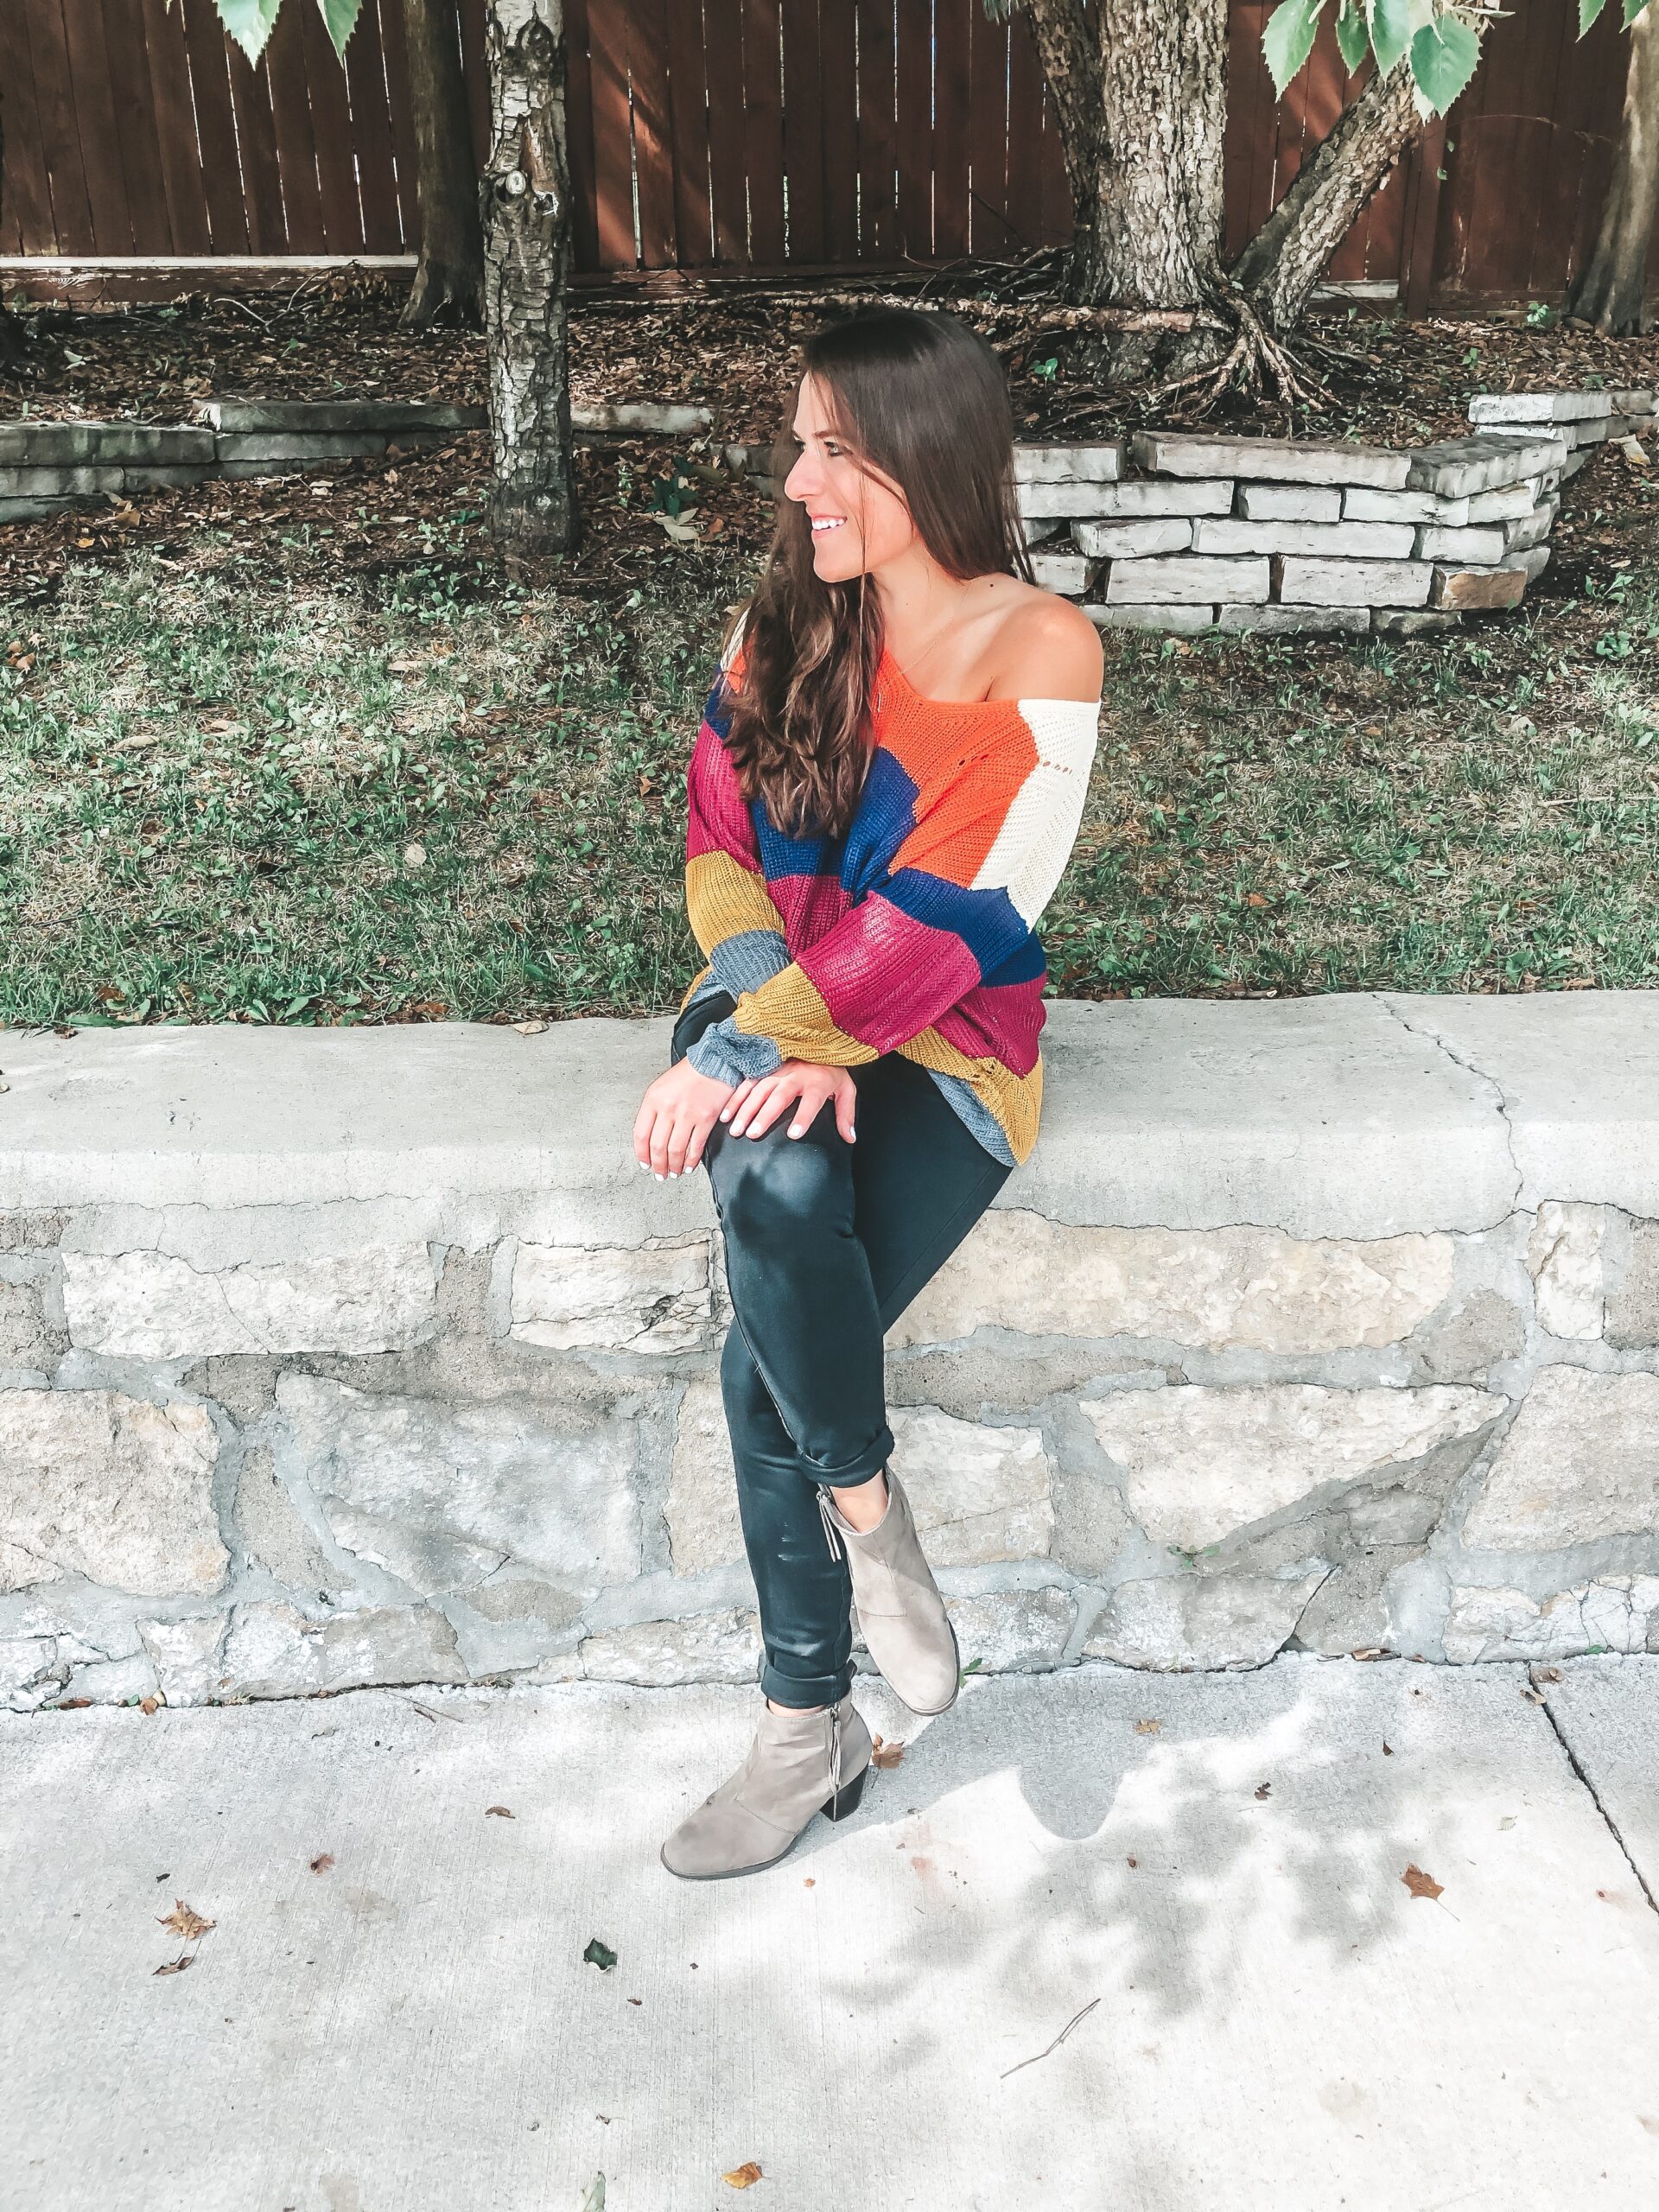 A woman wearing a colorful sweater sitting on a stone wall.